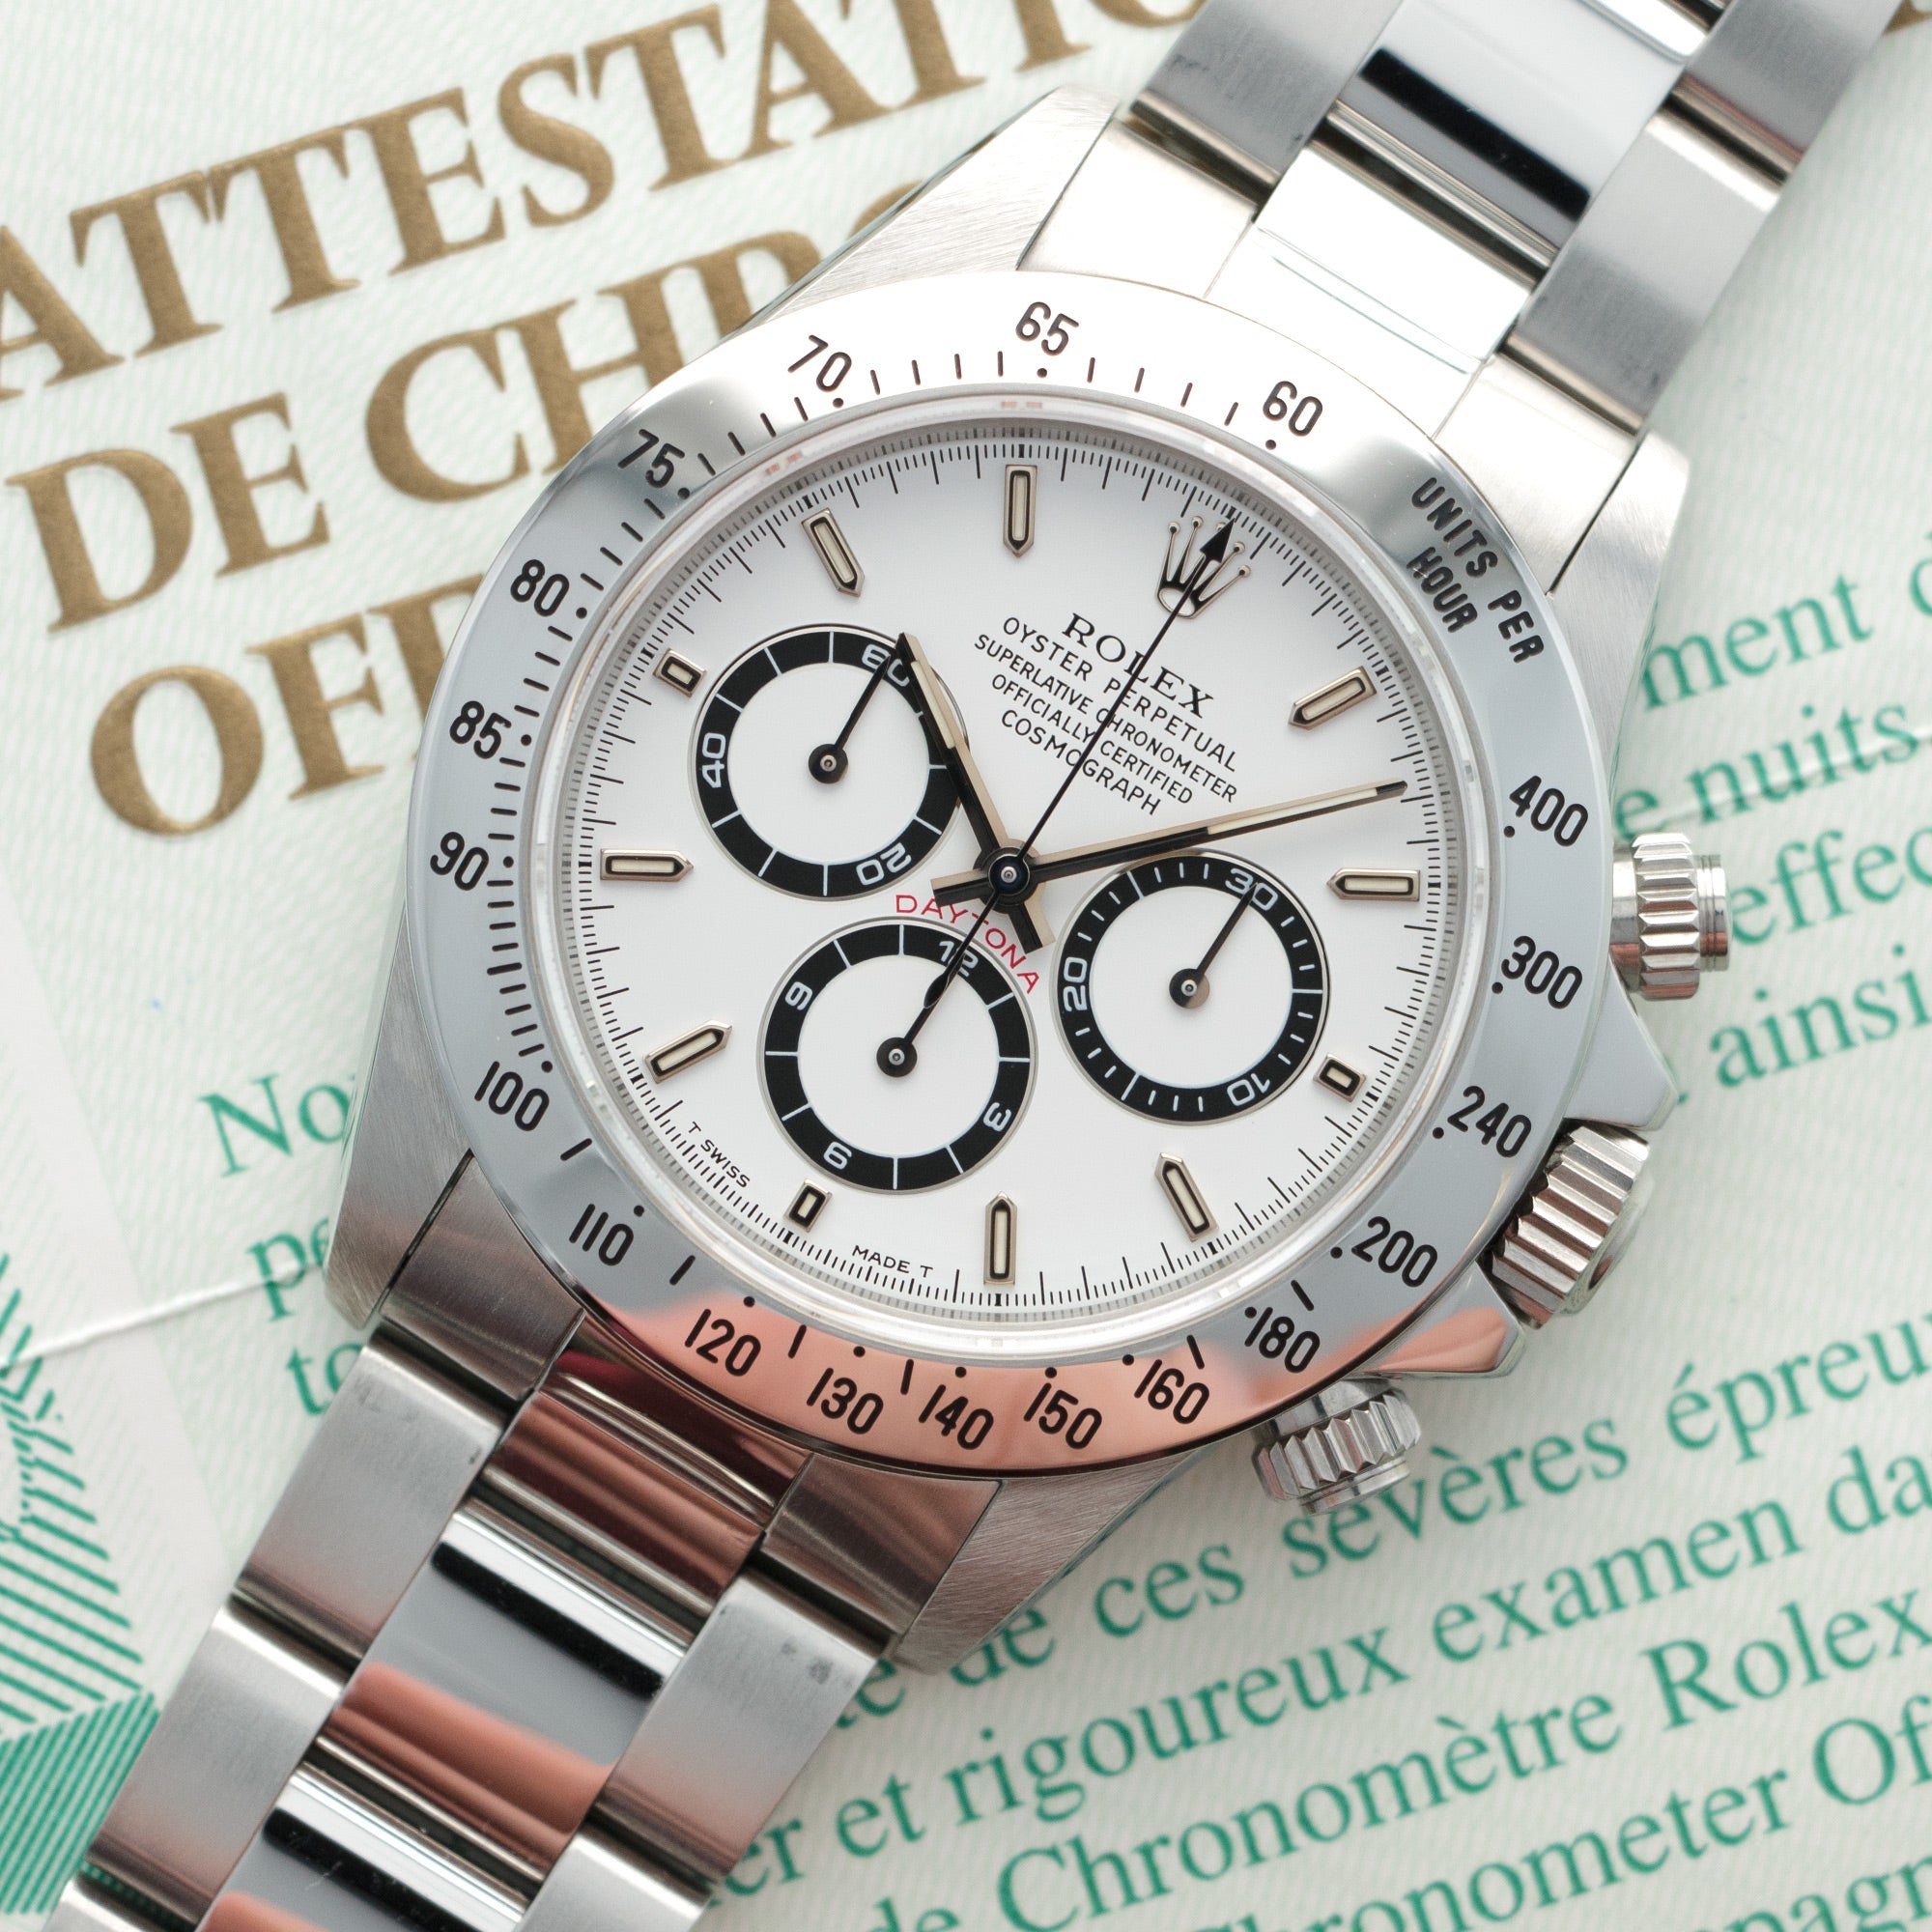 Rolex - Rolex Cosmograph Daytona Watch Ref. 16520 with Original Box and Papers, Completely New Old Stock - The Keystone Watches